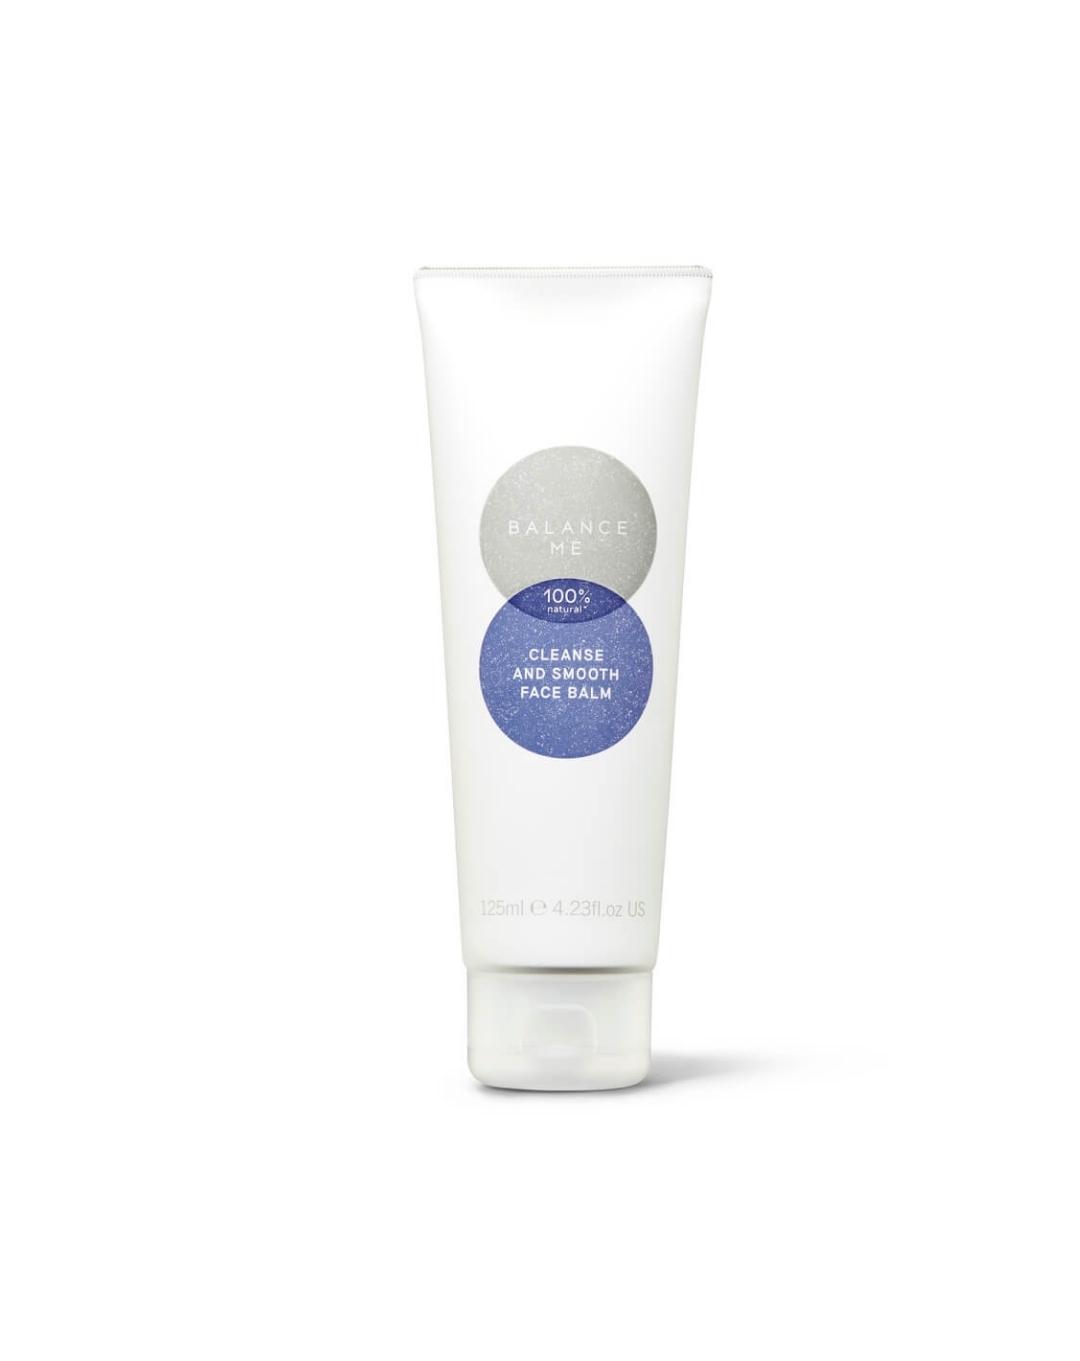 Balance me cleanse and smooth face balm